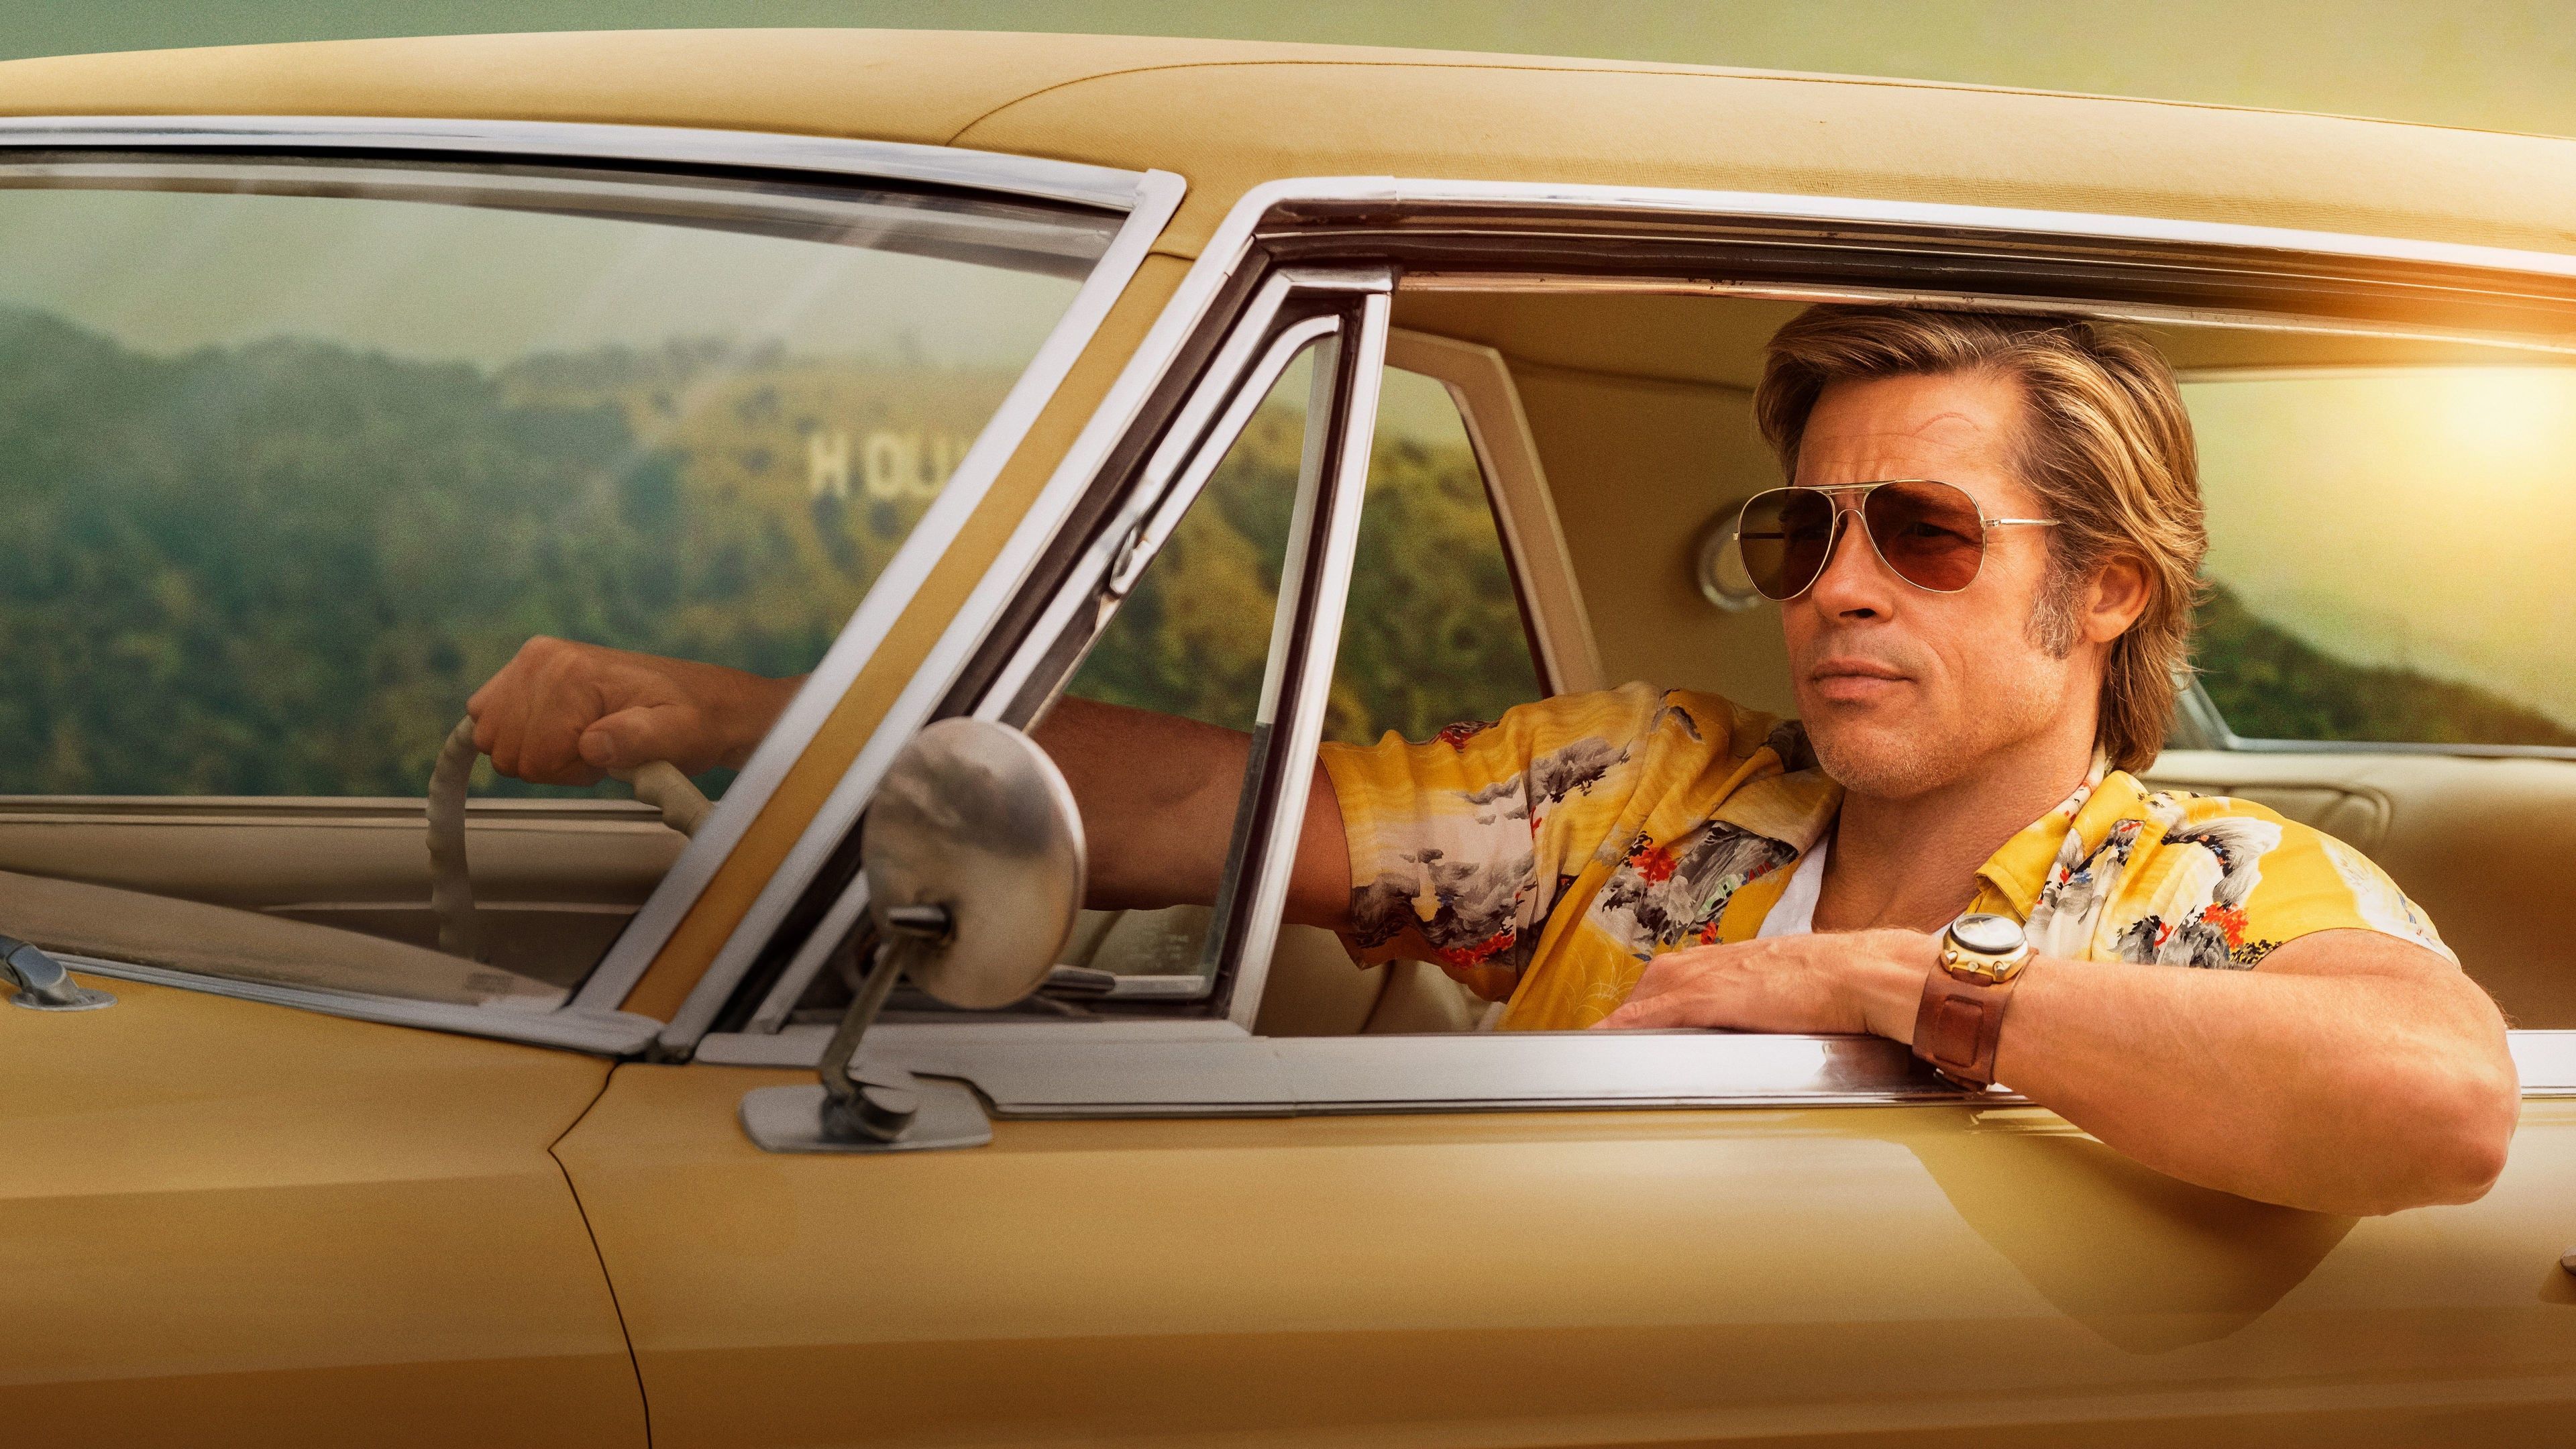 Bard Pitt Once Upon a time in Hollywood